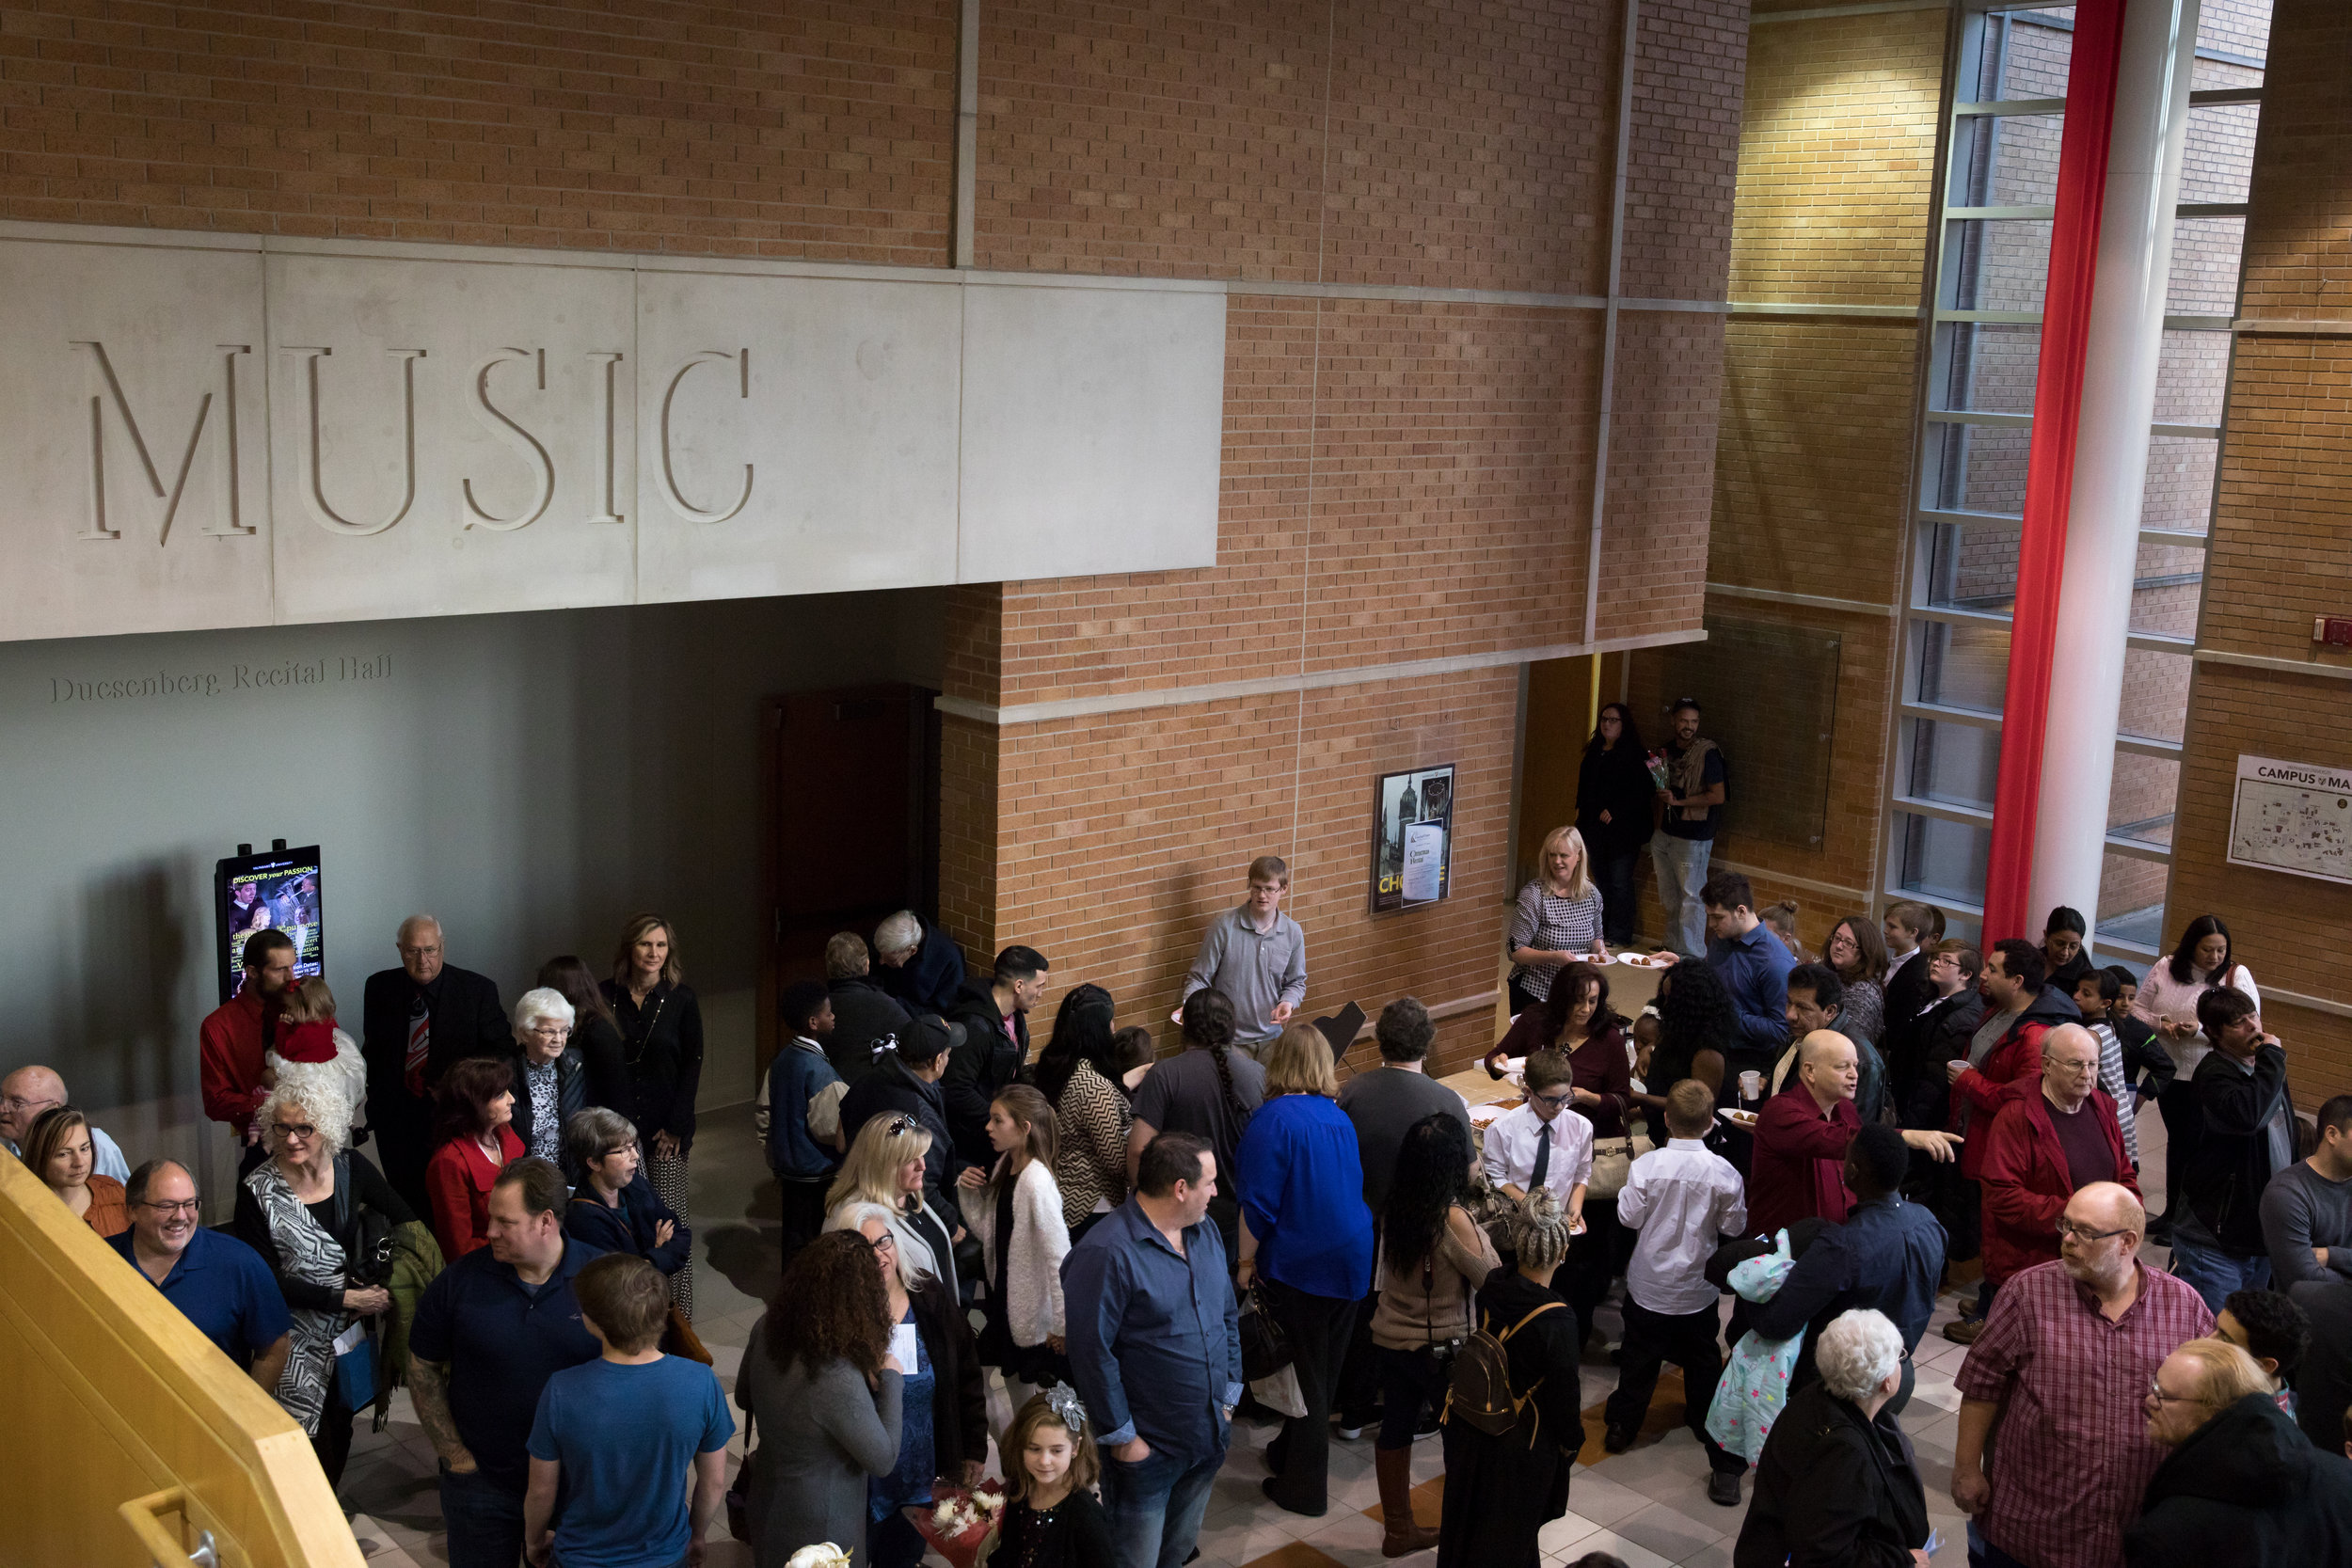 people gathered with music sign in backgroun-1.JPG